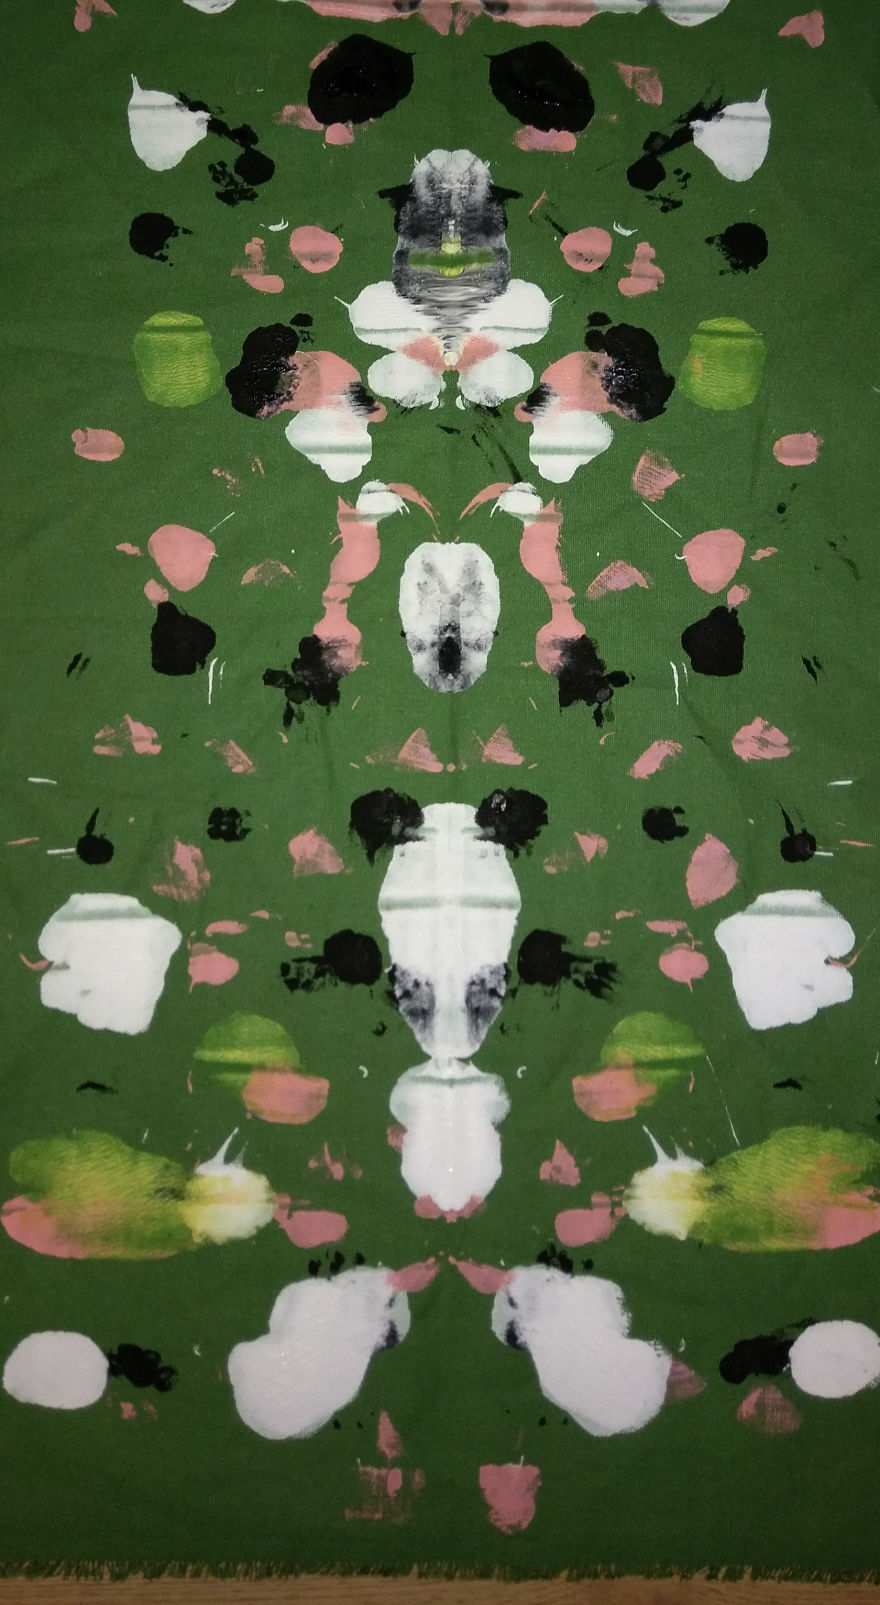 Remember Inkblot Test? I Took It As An Idea For Fabric Painting